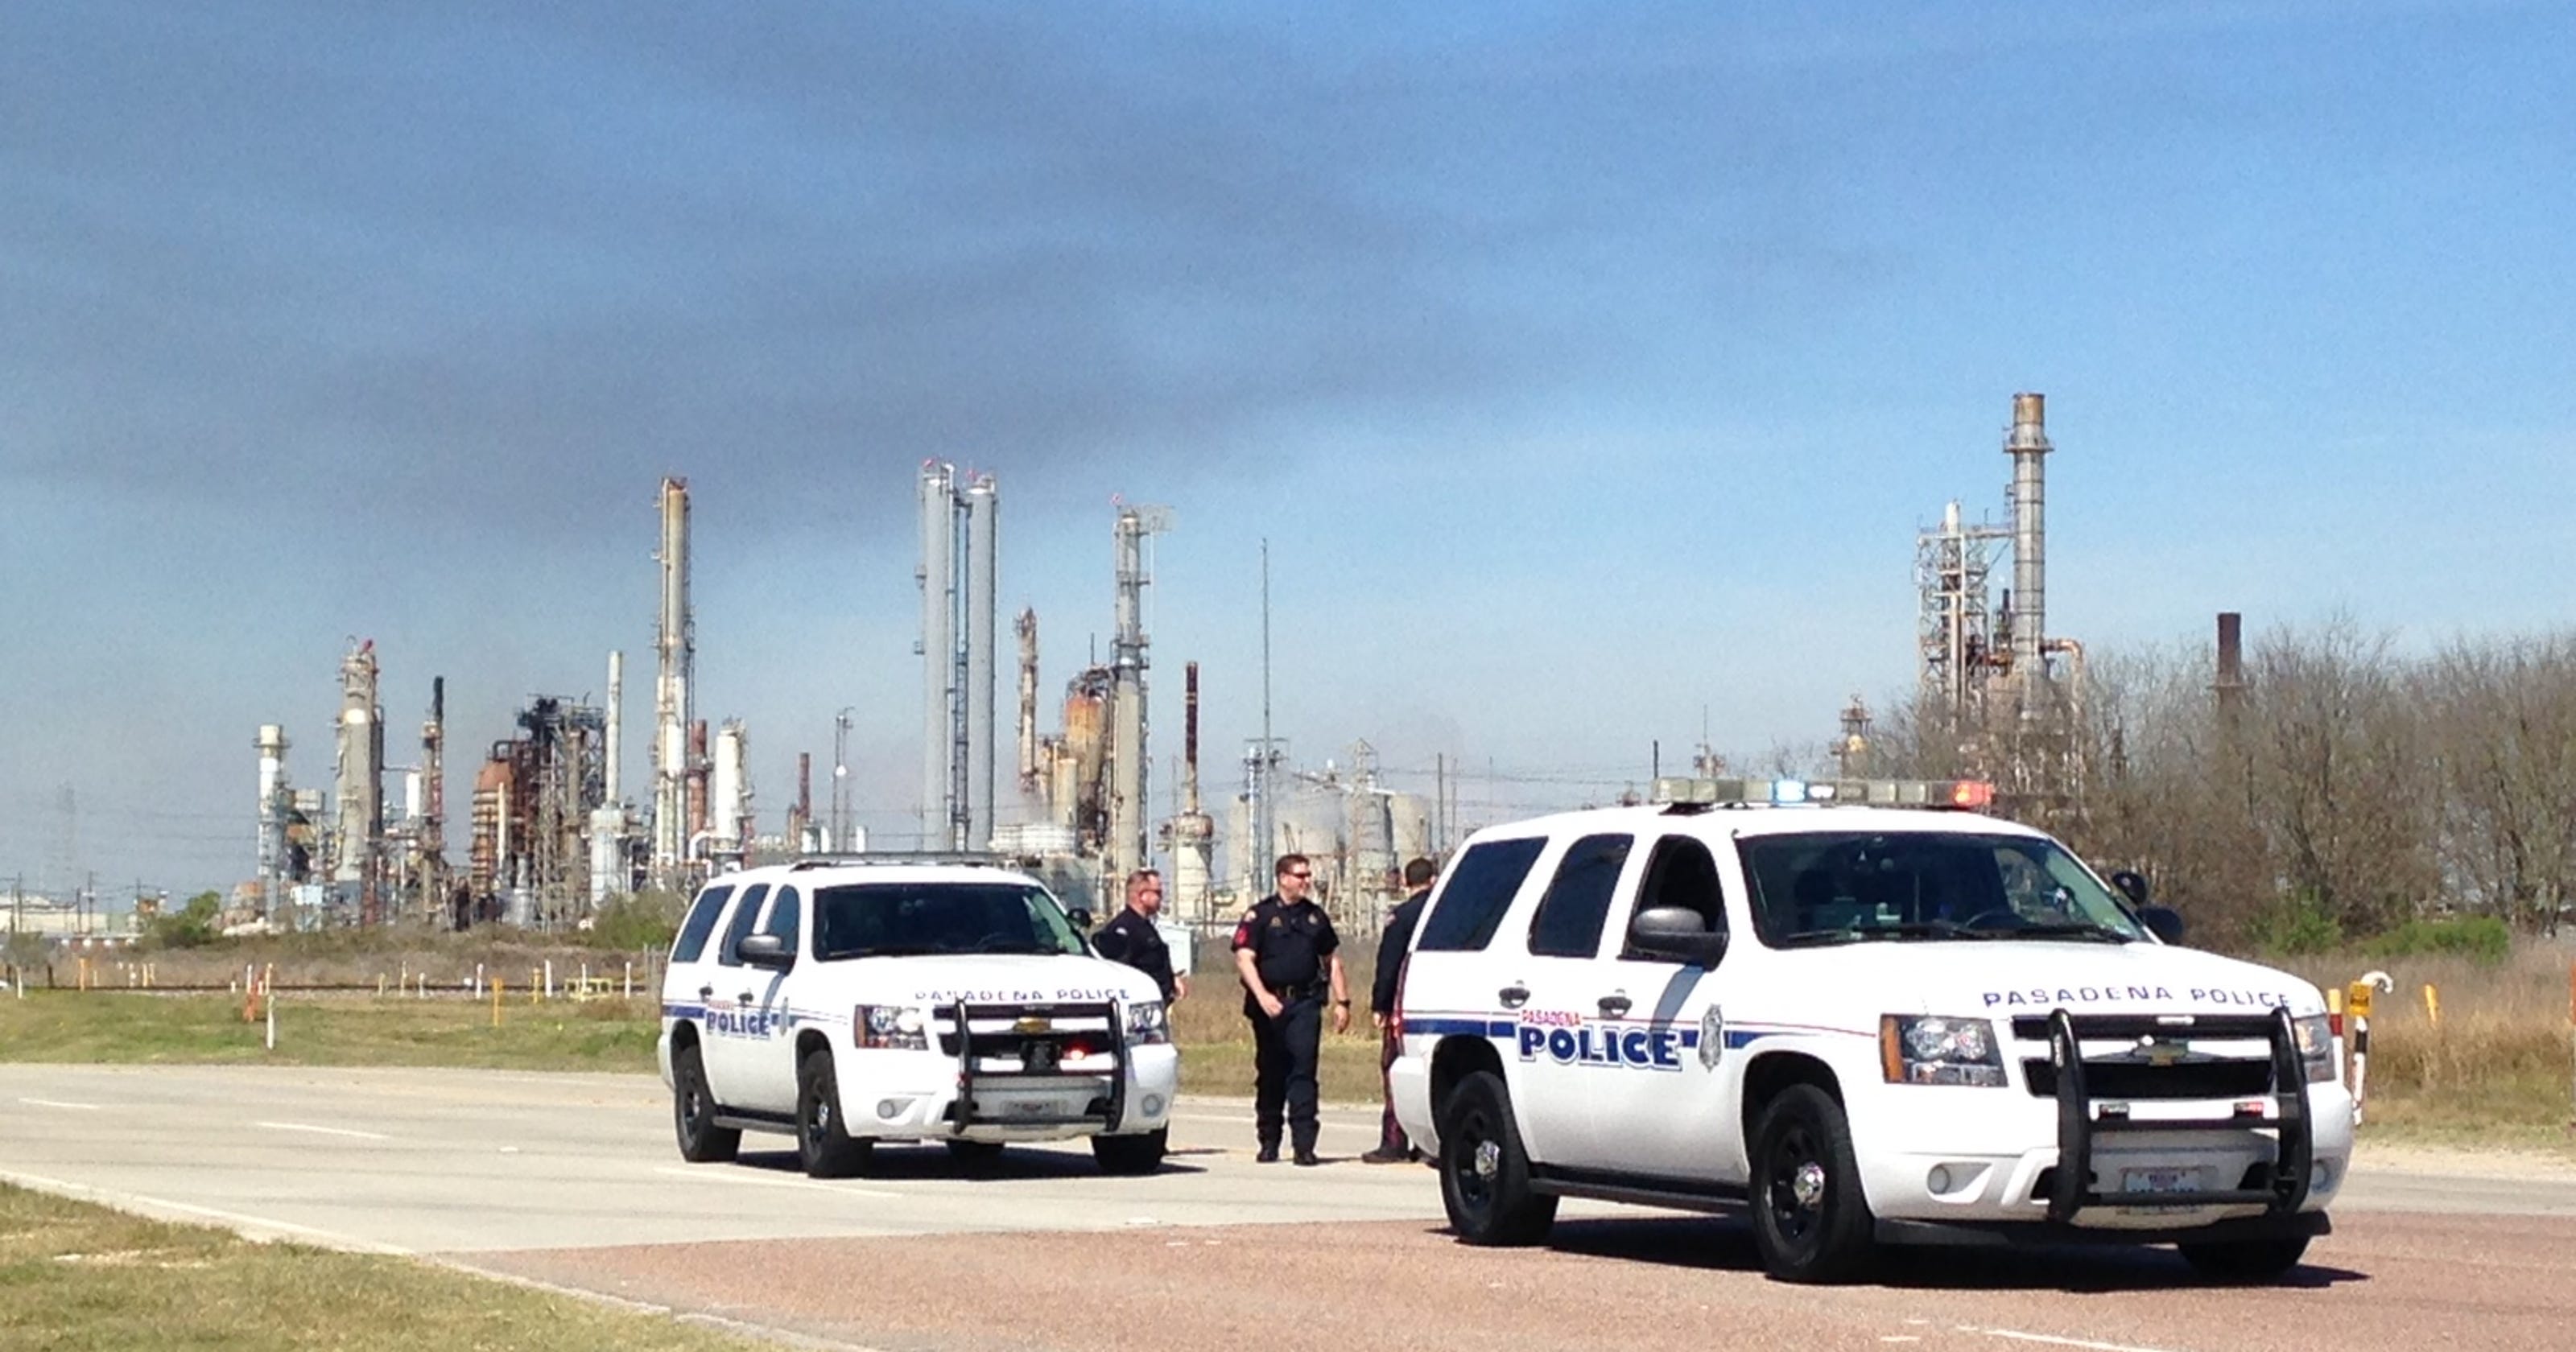 Police: Explosion at refinery injures one in Texas3200 x 1680